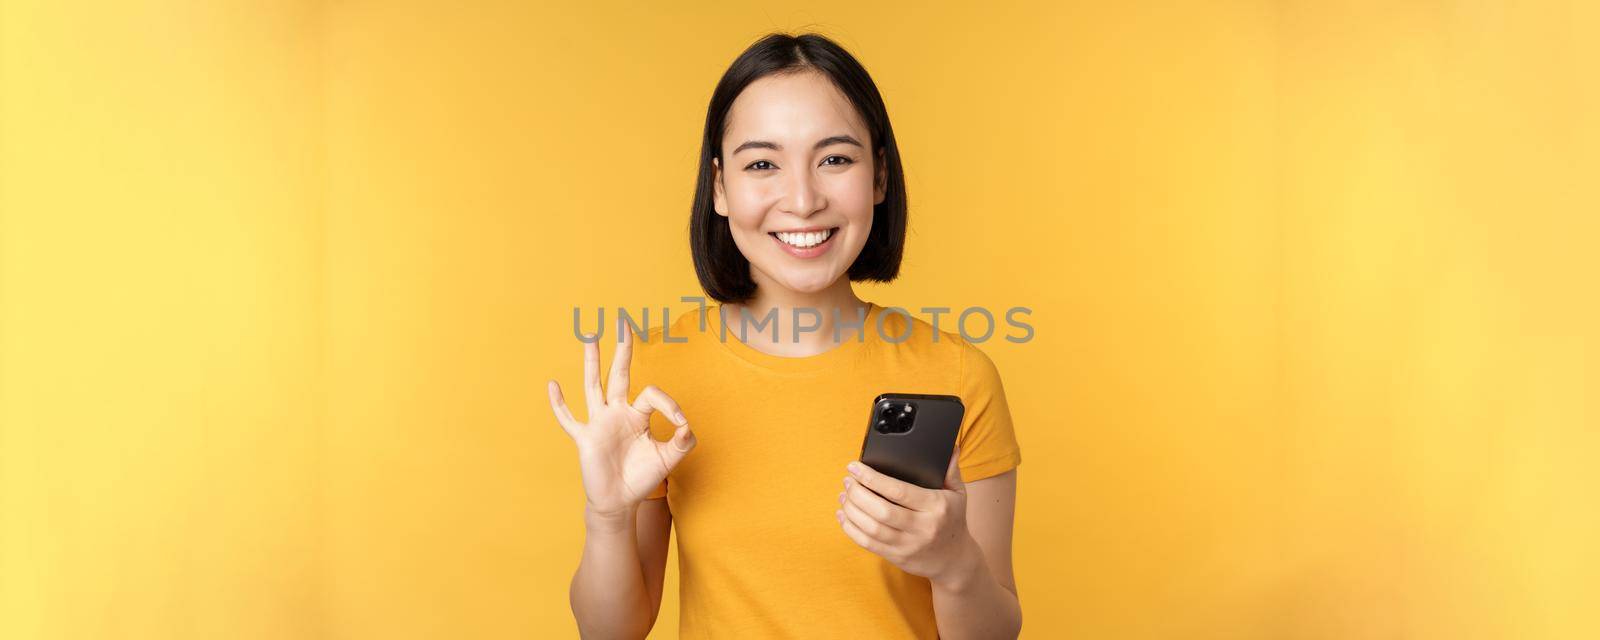 Happy smiling asian girl holding mobile phone and showing okay, recommending application on smartphone, standing over yellow background.